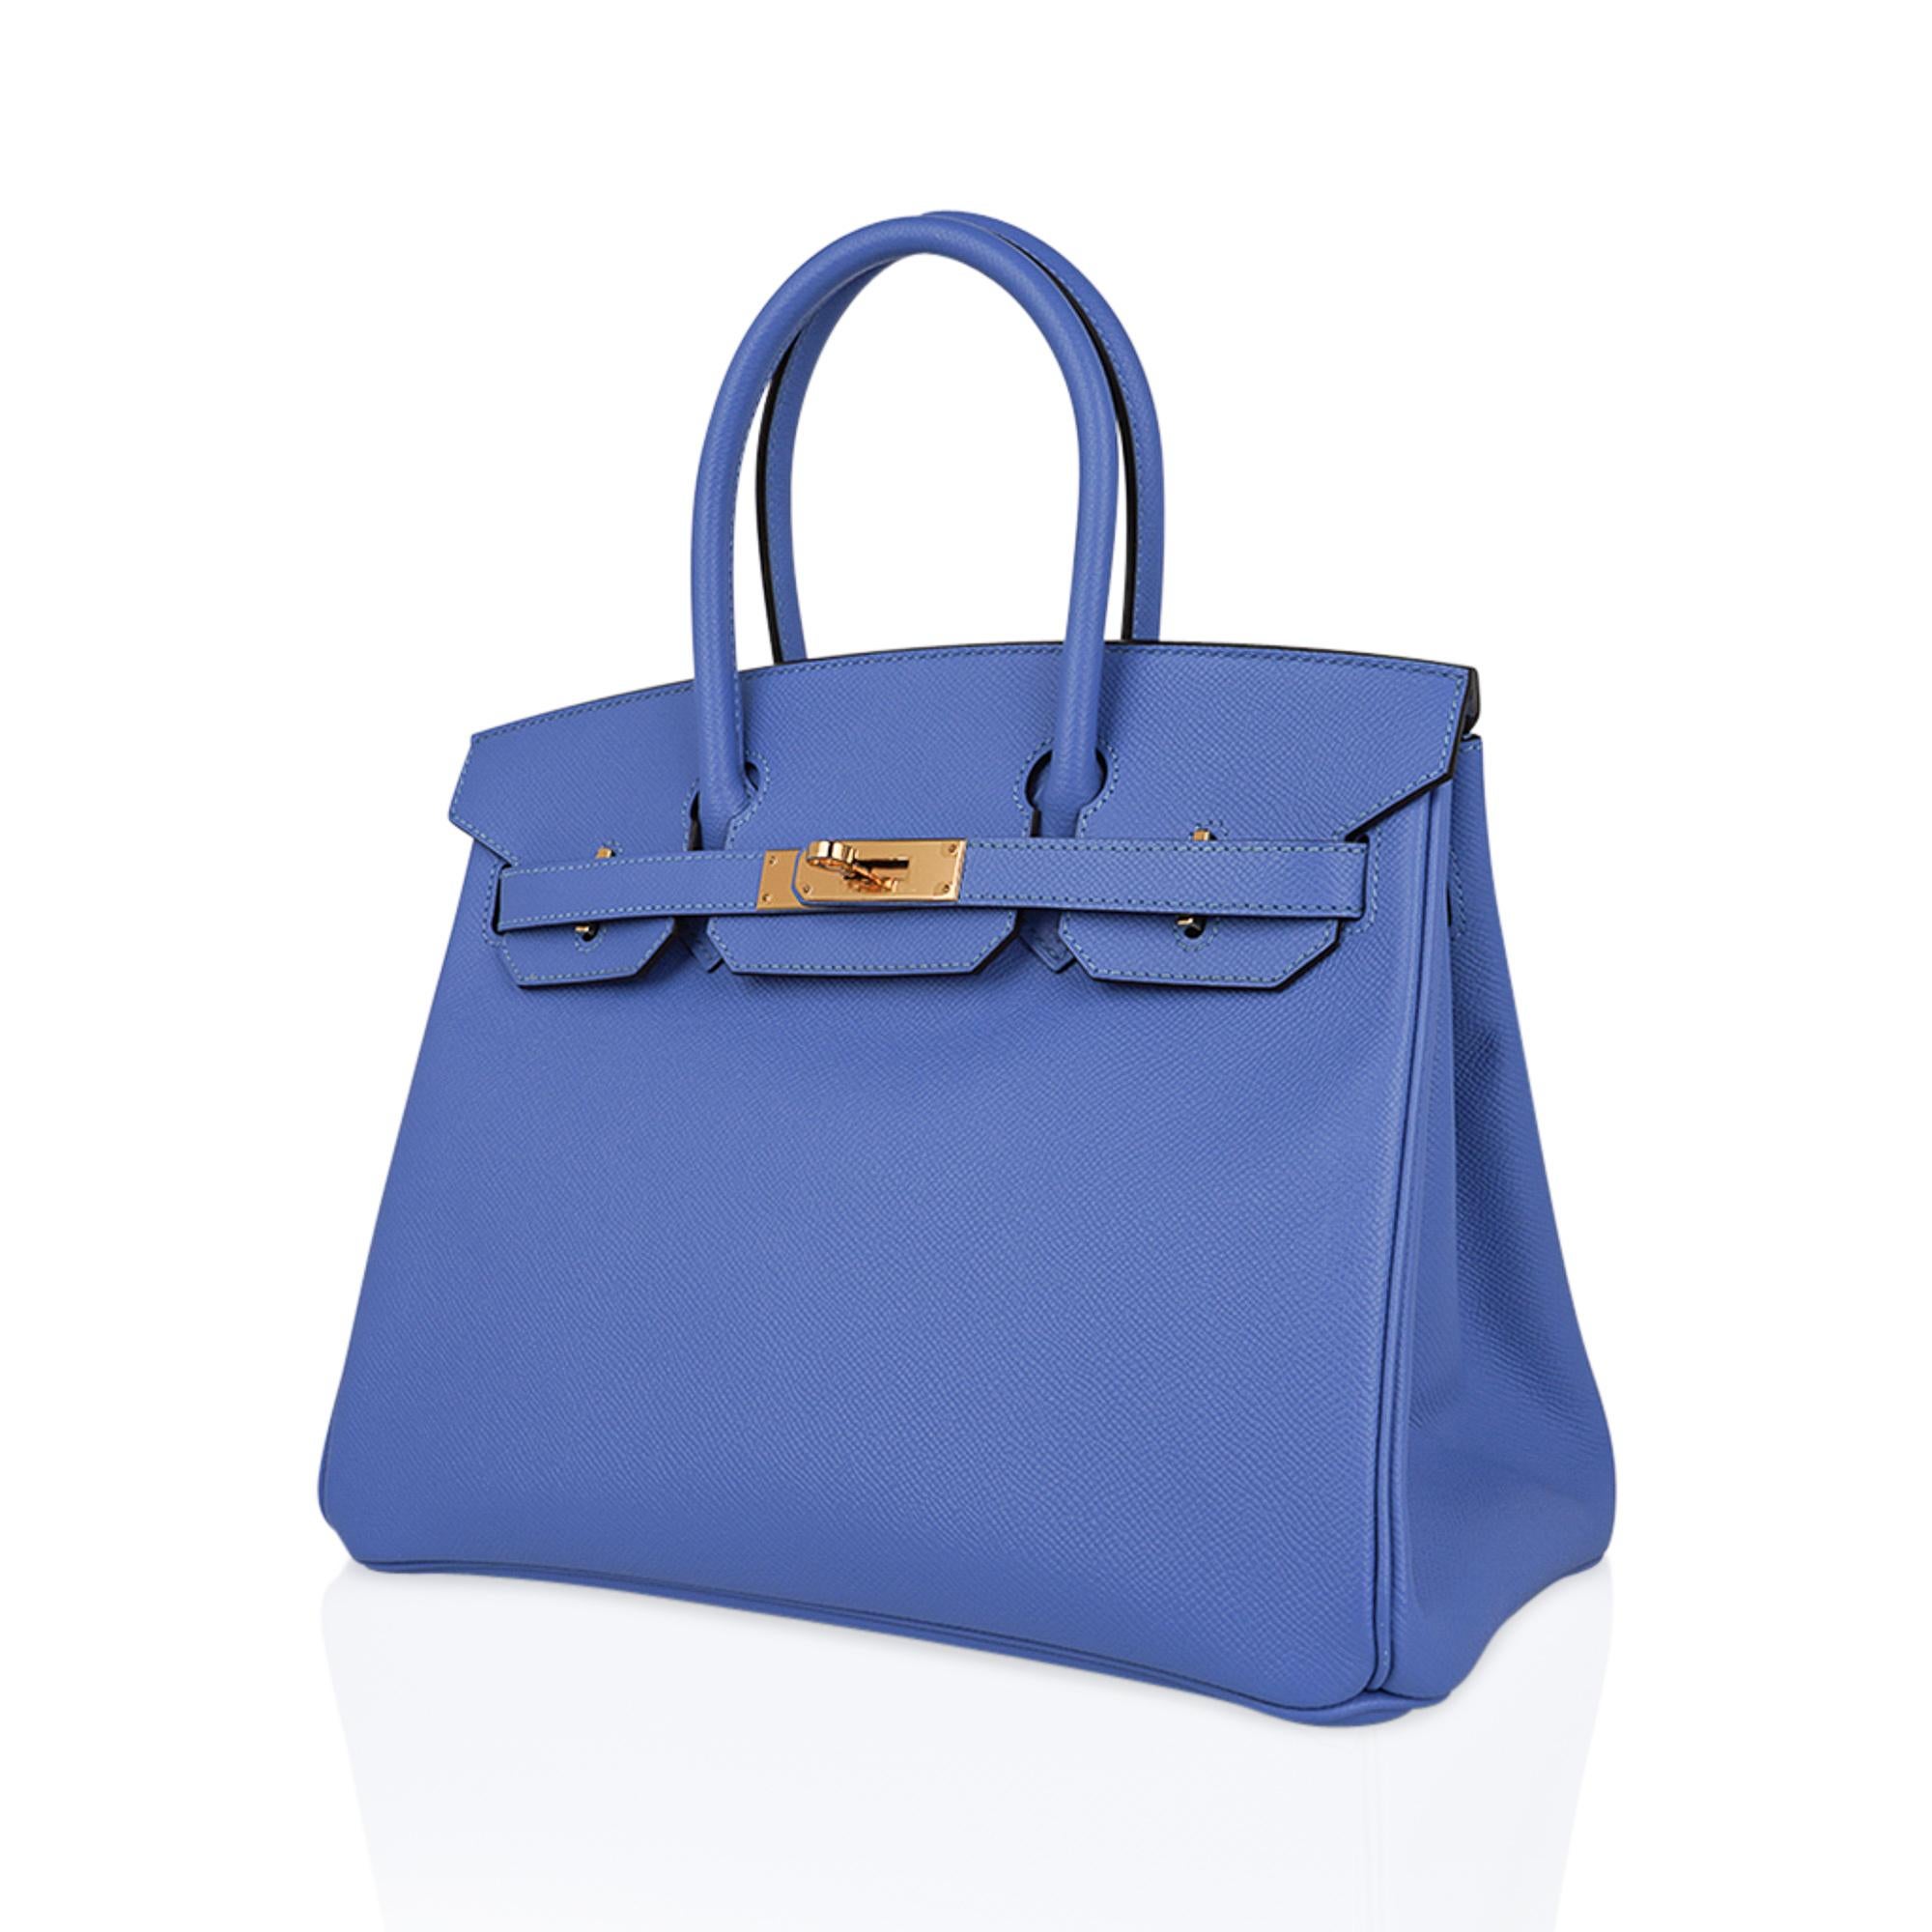 Mightychic offers an Beautiful neutral Bleu Paradis Hermes Birkin 30 bag is a rare find as the colour is retired.
Featured in Epsom leather which holds the shape of the bag and is lighter in weight. 
Accentuated with rich gold hardware.
This no